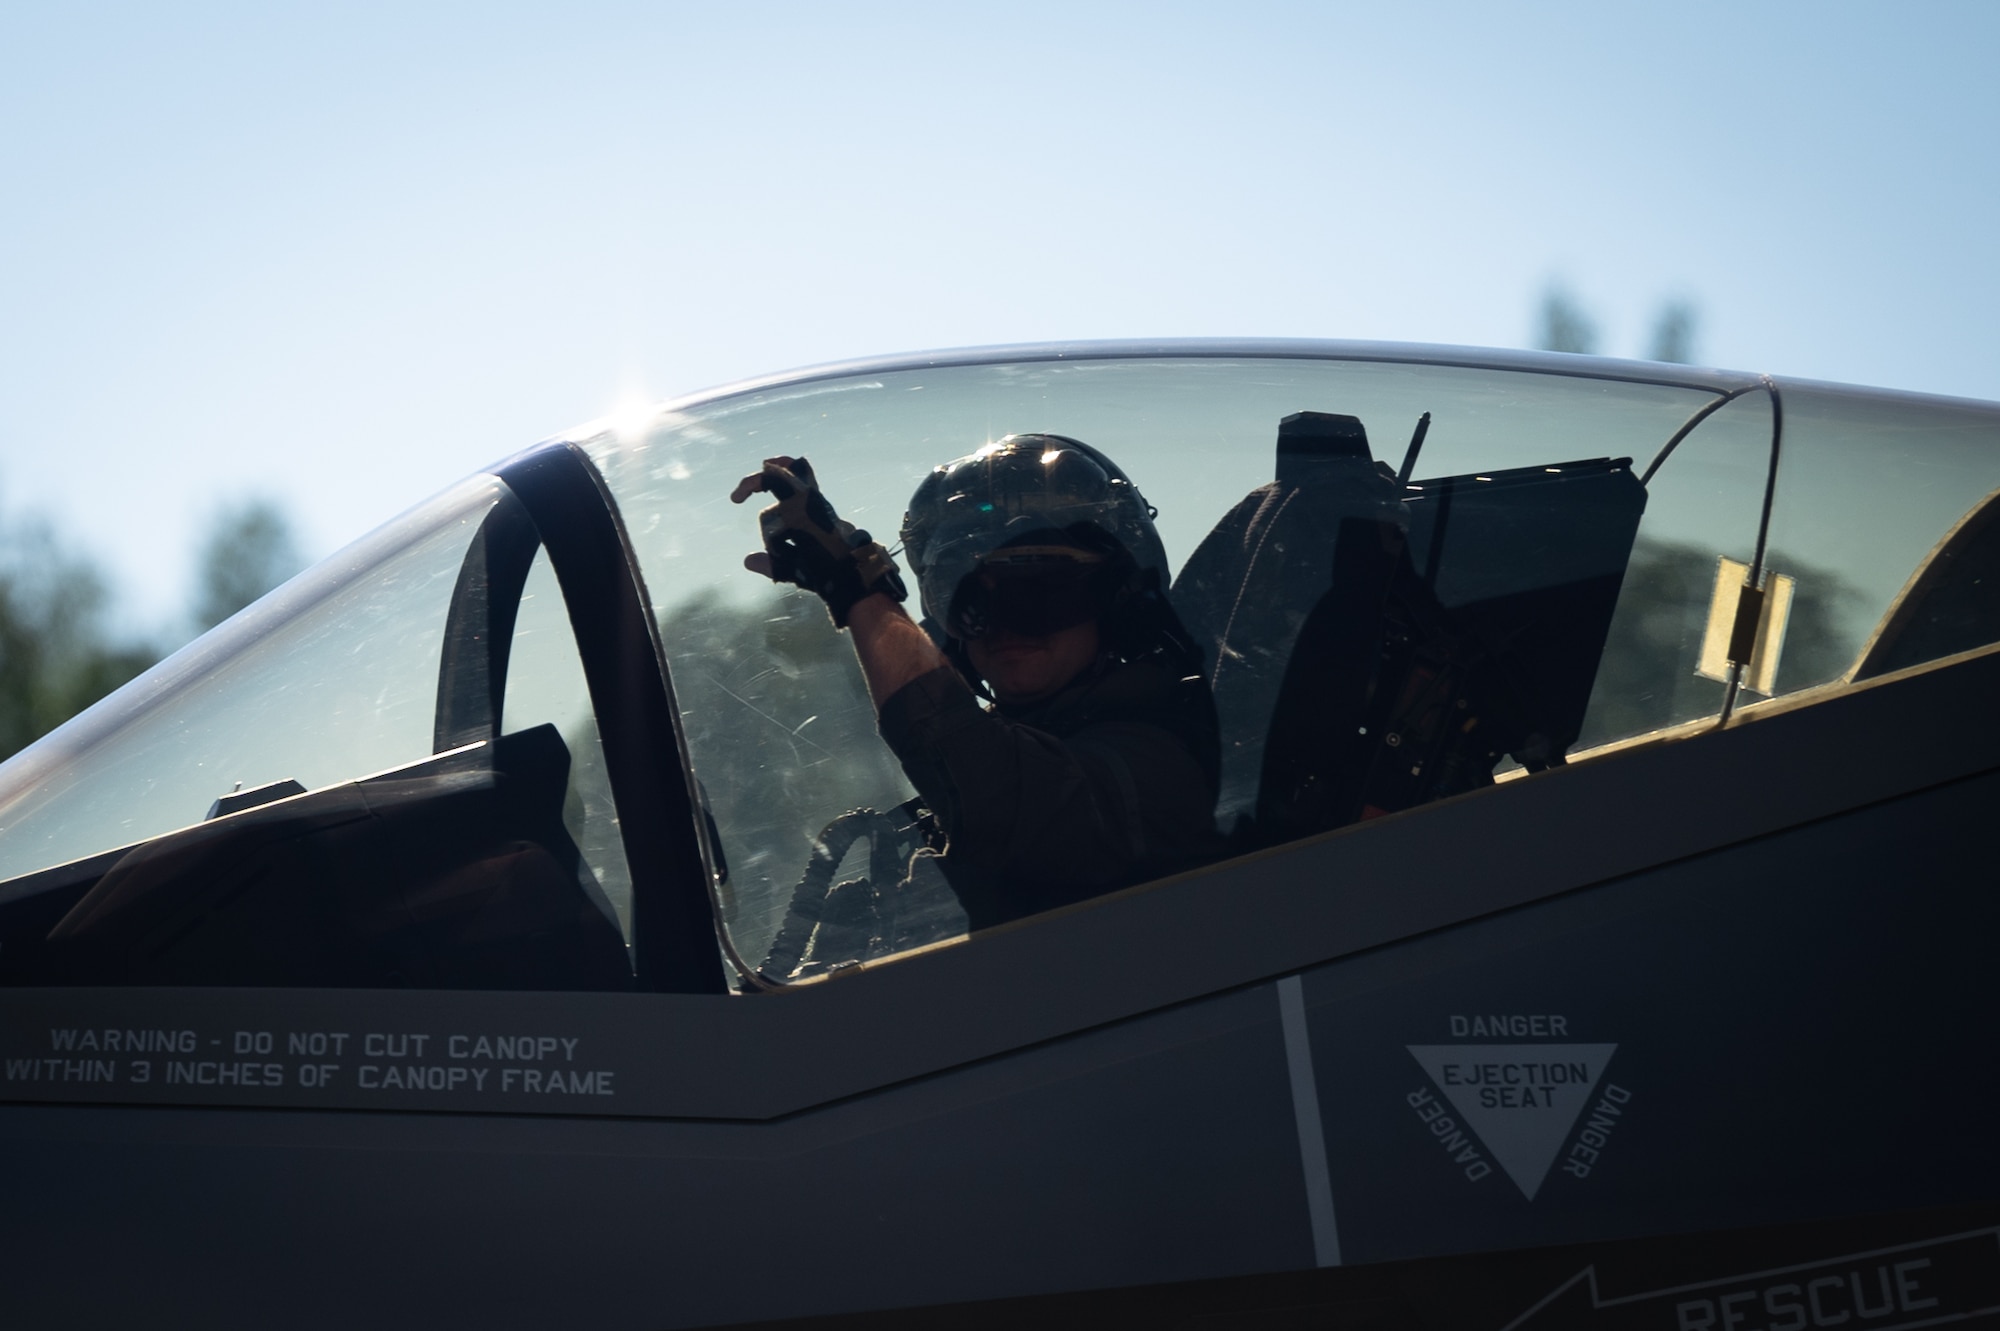 U.S. Air Force Lt. Col. Samuel Chipman, the 355th Fighter Squadron (FS) commander, renders the squadron salute prior to takeoff on Eielson Air Force Base, Alaska, July 1, 2021.